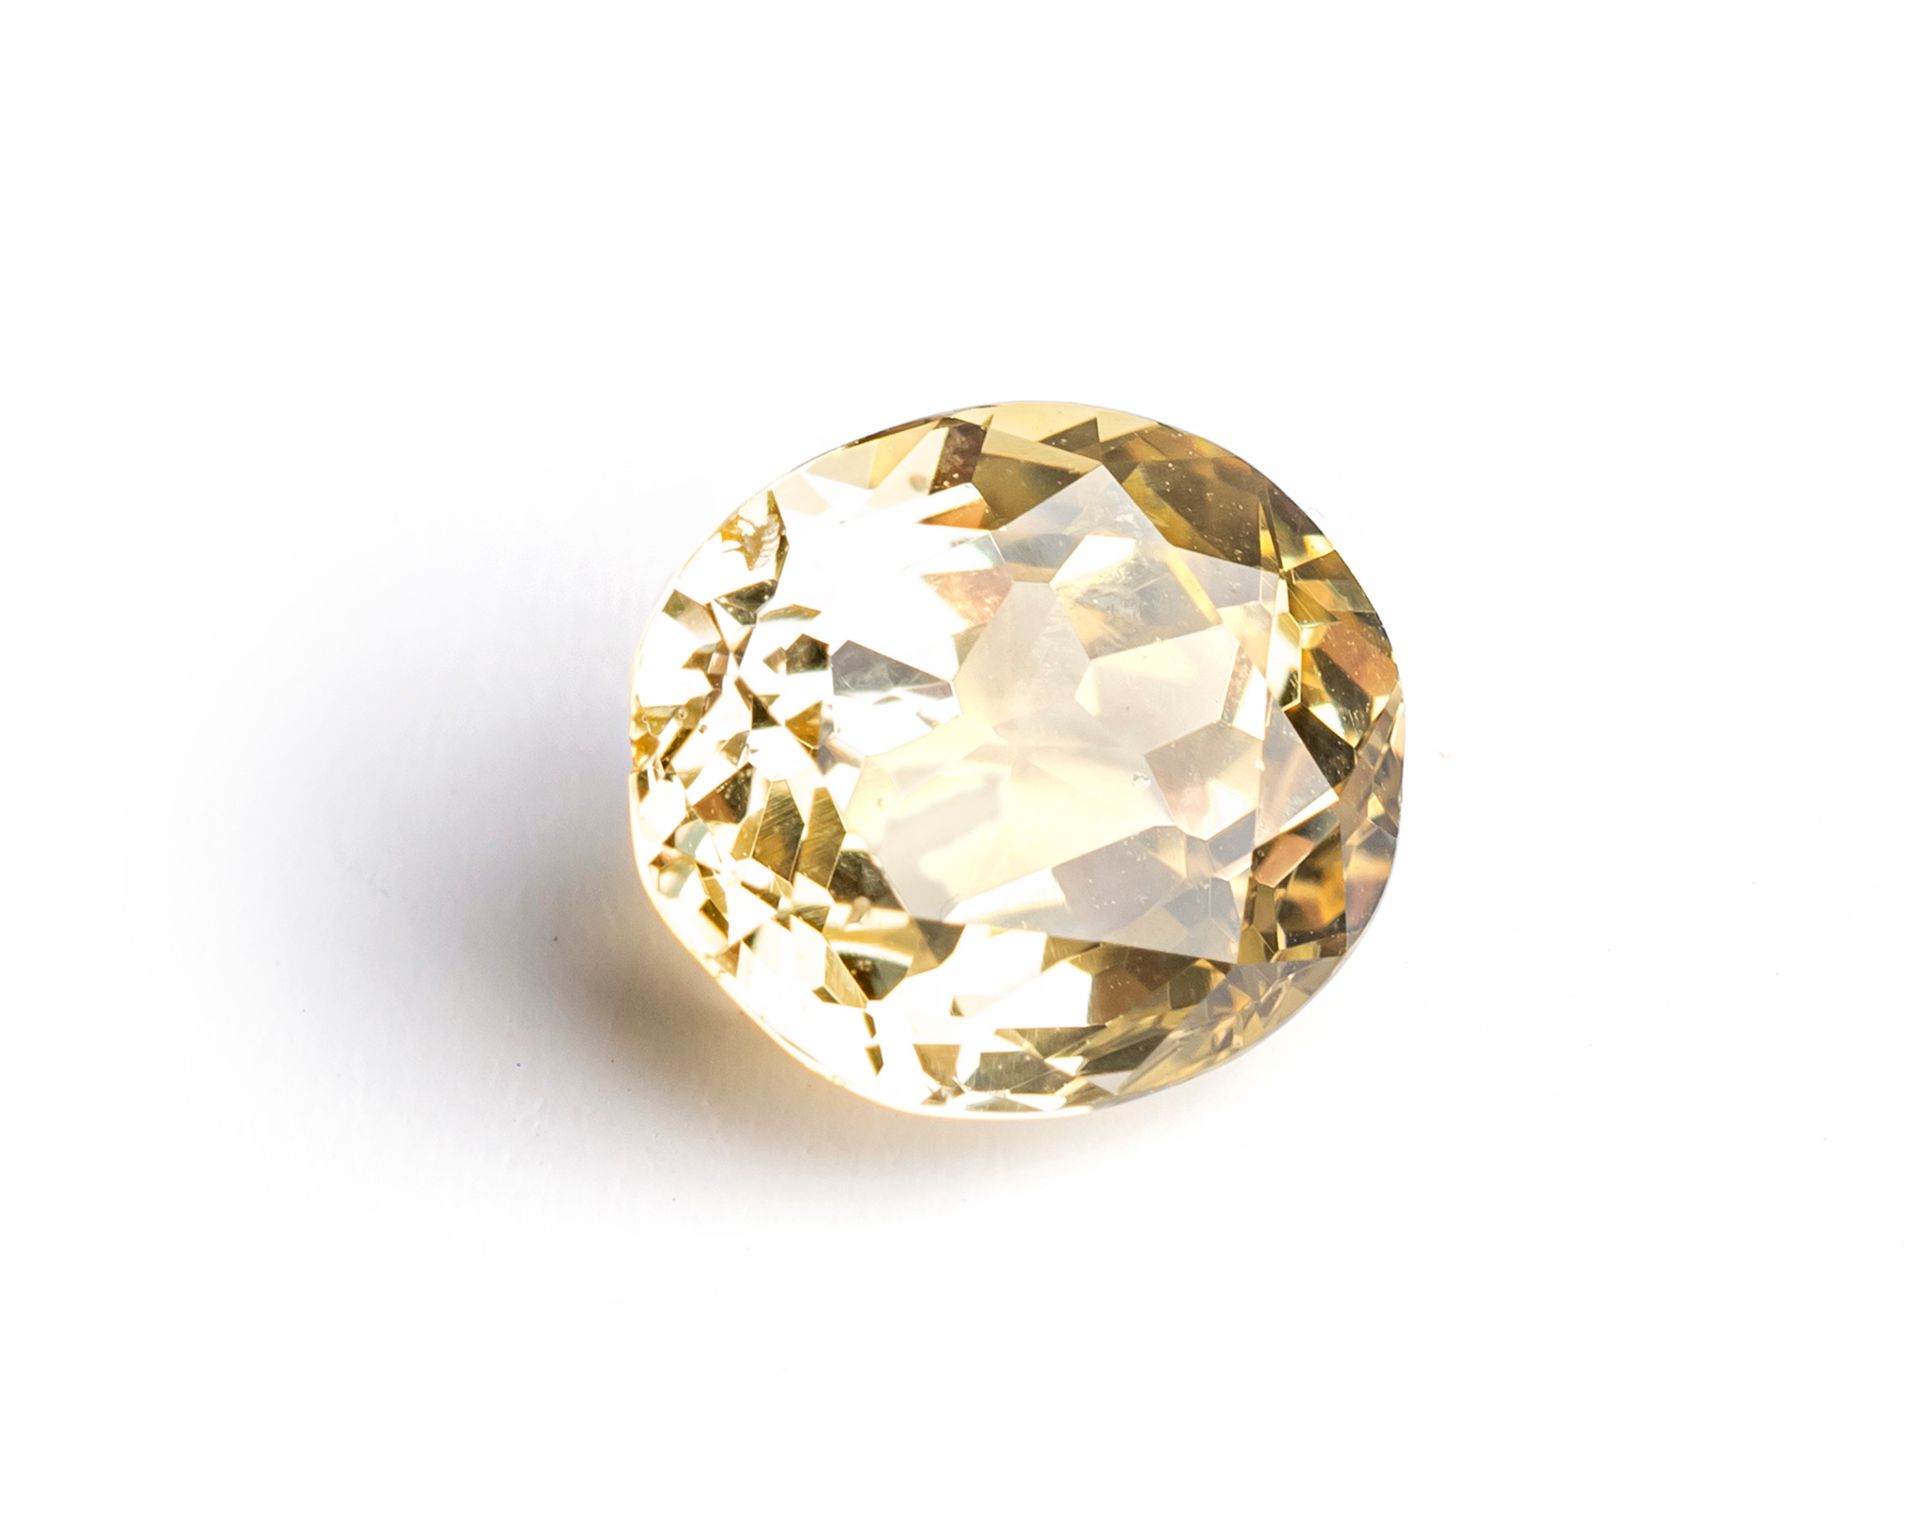 Null Faceted oval yellow sapphire on paper weighing 2.82 carat